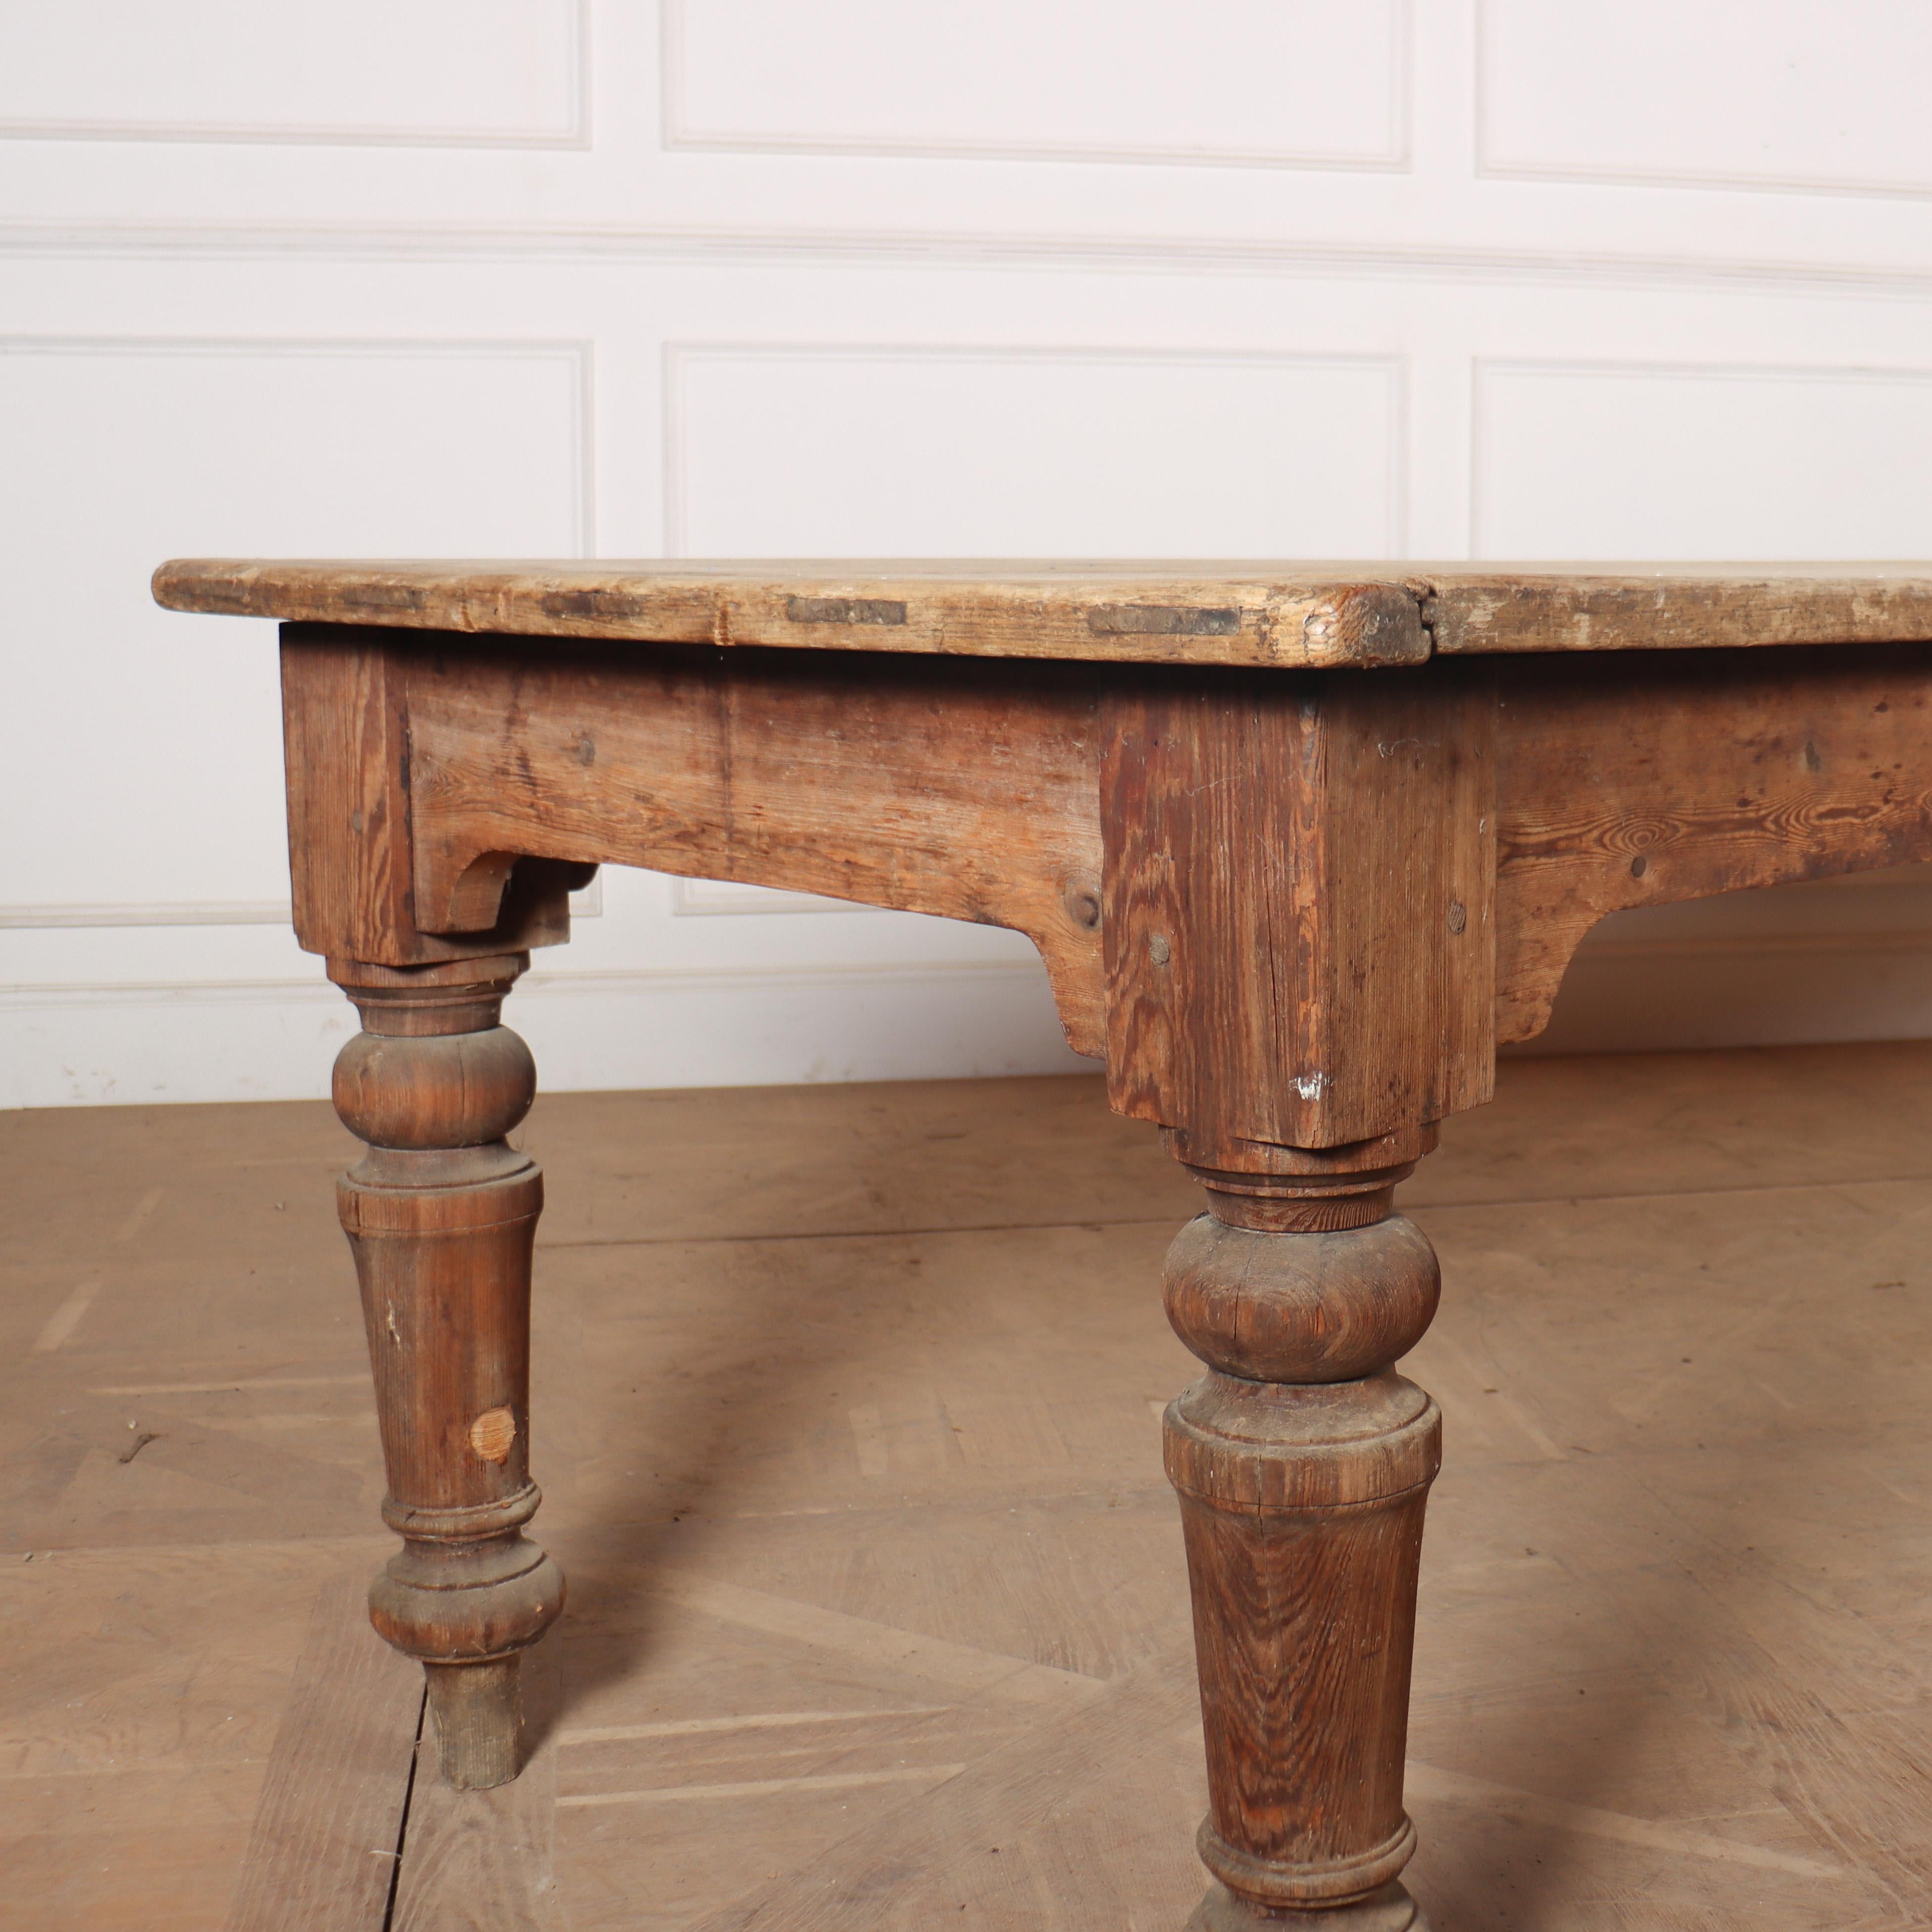 Stunning 19th C Irish scrubbed pine farmhouse table with a wonderful two board top. 1860.

Height to apron is 25